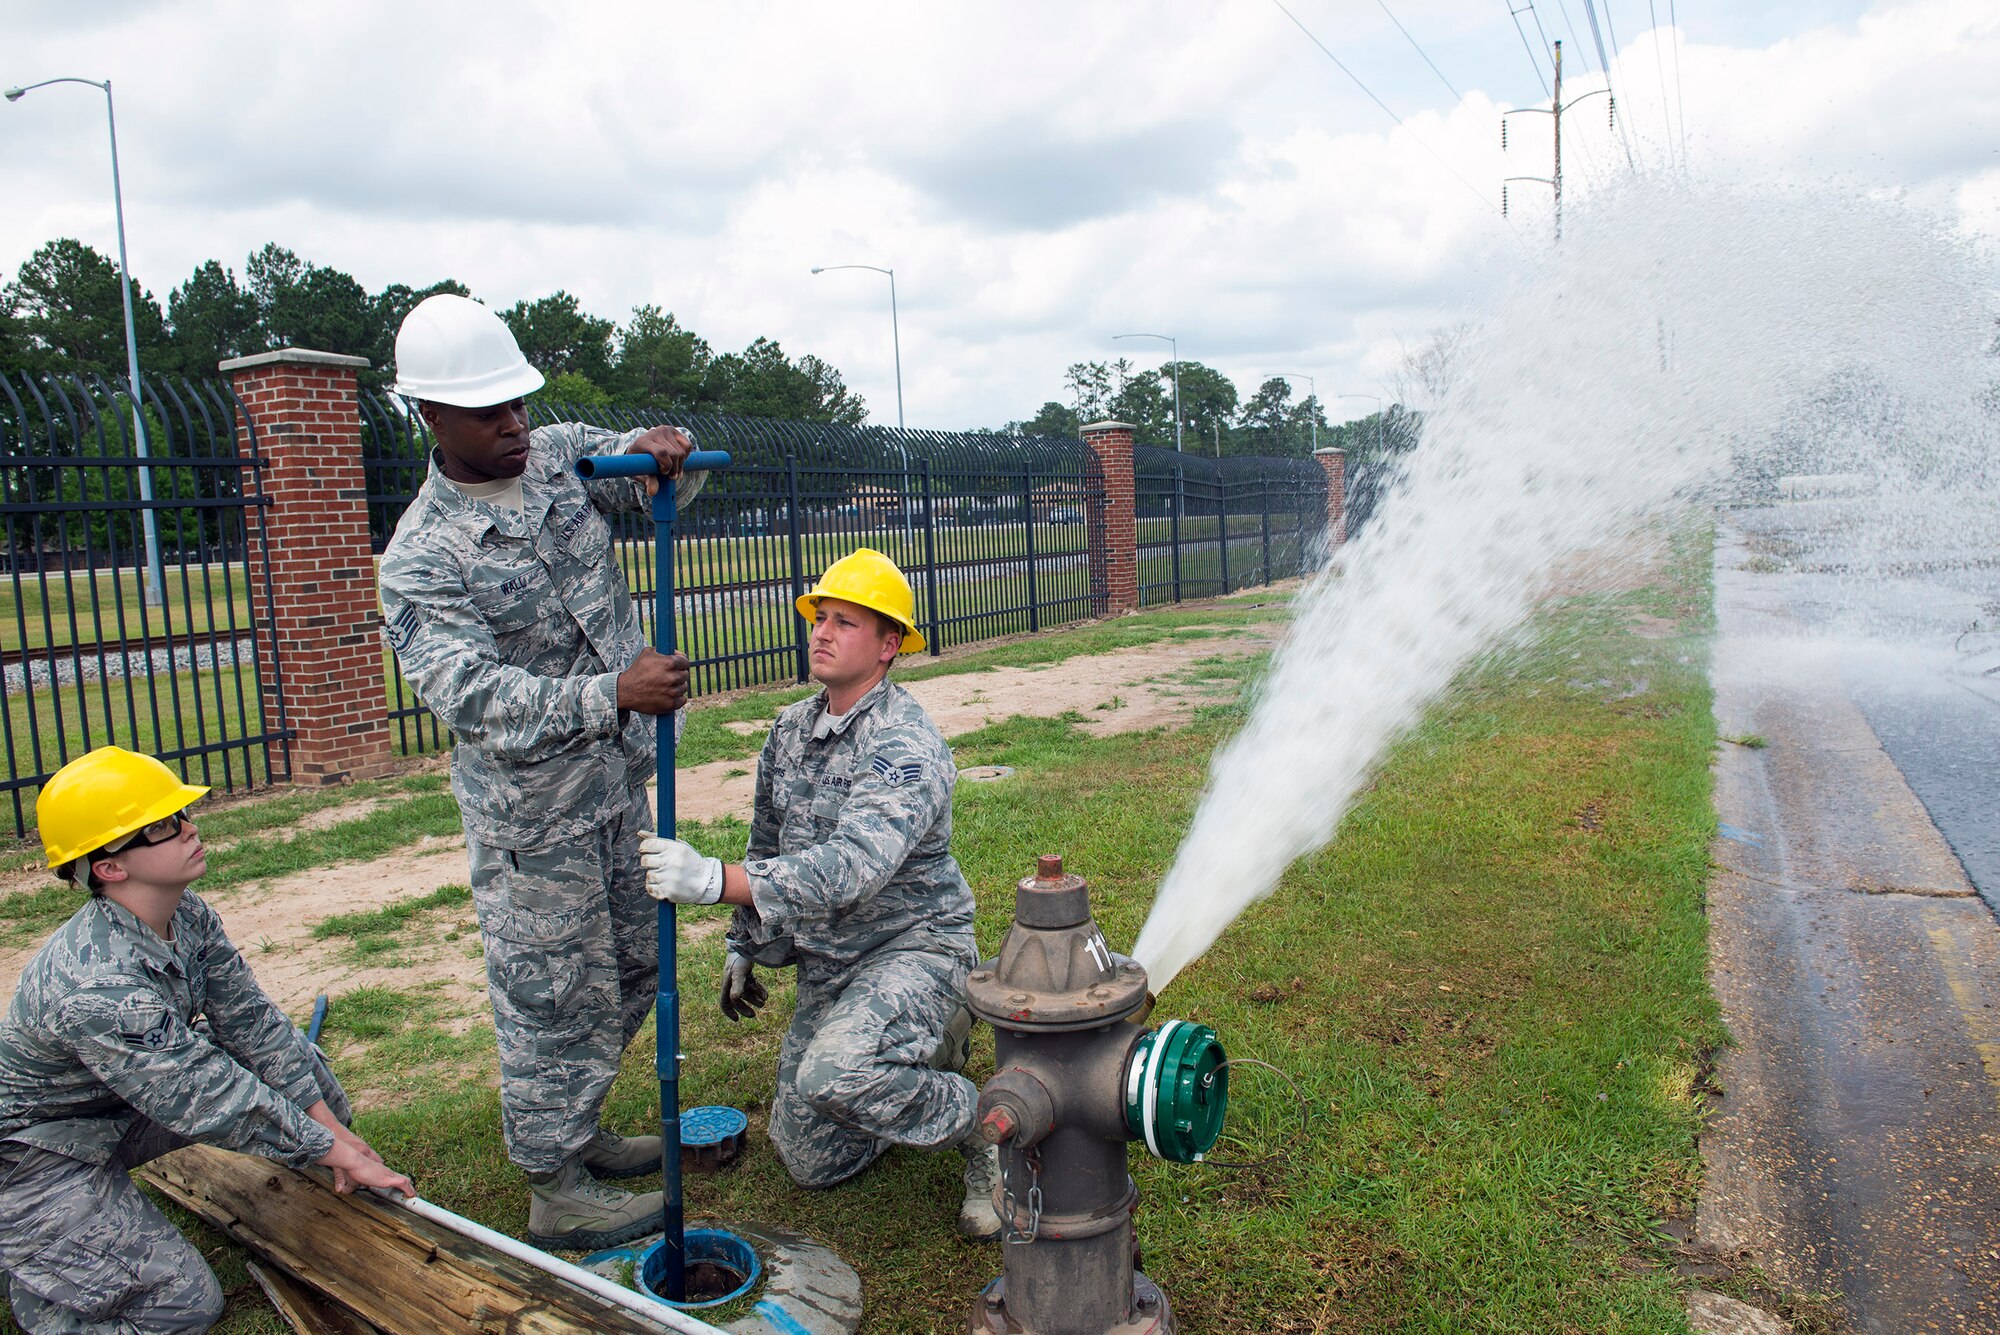 Water and fuels system maintenance specialists from the 23d Civil Engineer Squadron simulate repairing a damaged power line and fire hydrant after a car accident during a hurricane exercise, May 17, 2016, at Moody Air Force Base, Ga. After fixing the flooding from the hydrant, the 23d CES fire department was able to assess the injured driver. (U.S. Air Force photo by Airman 1st Class Greg Nash/Released)